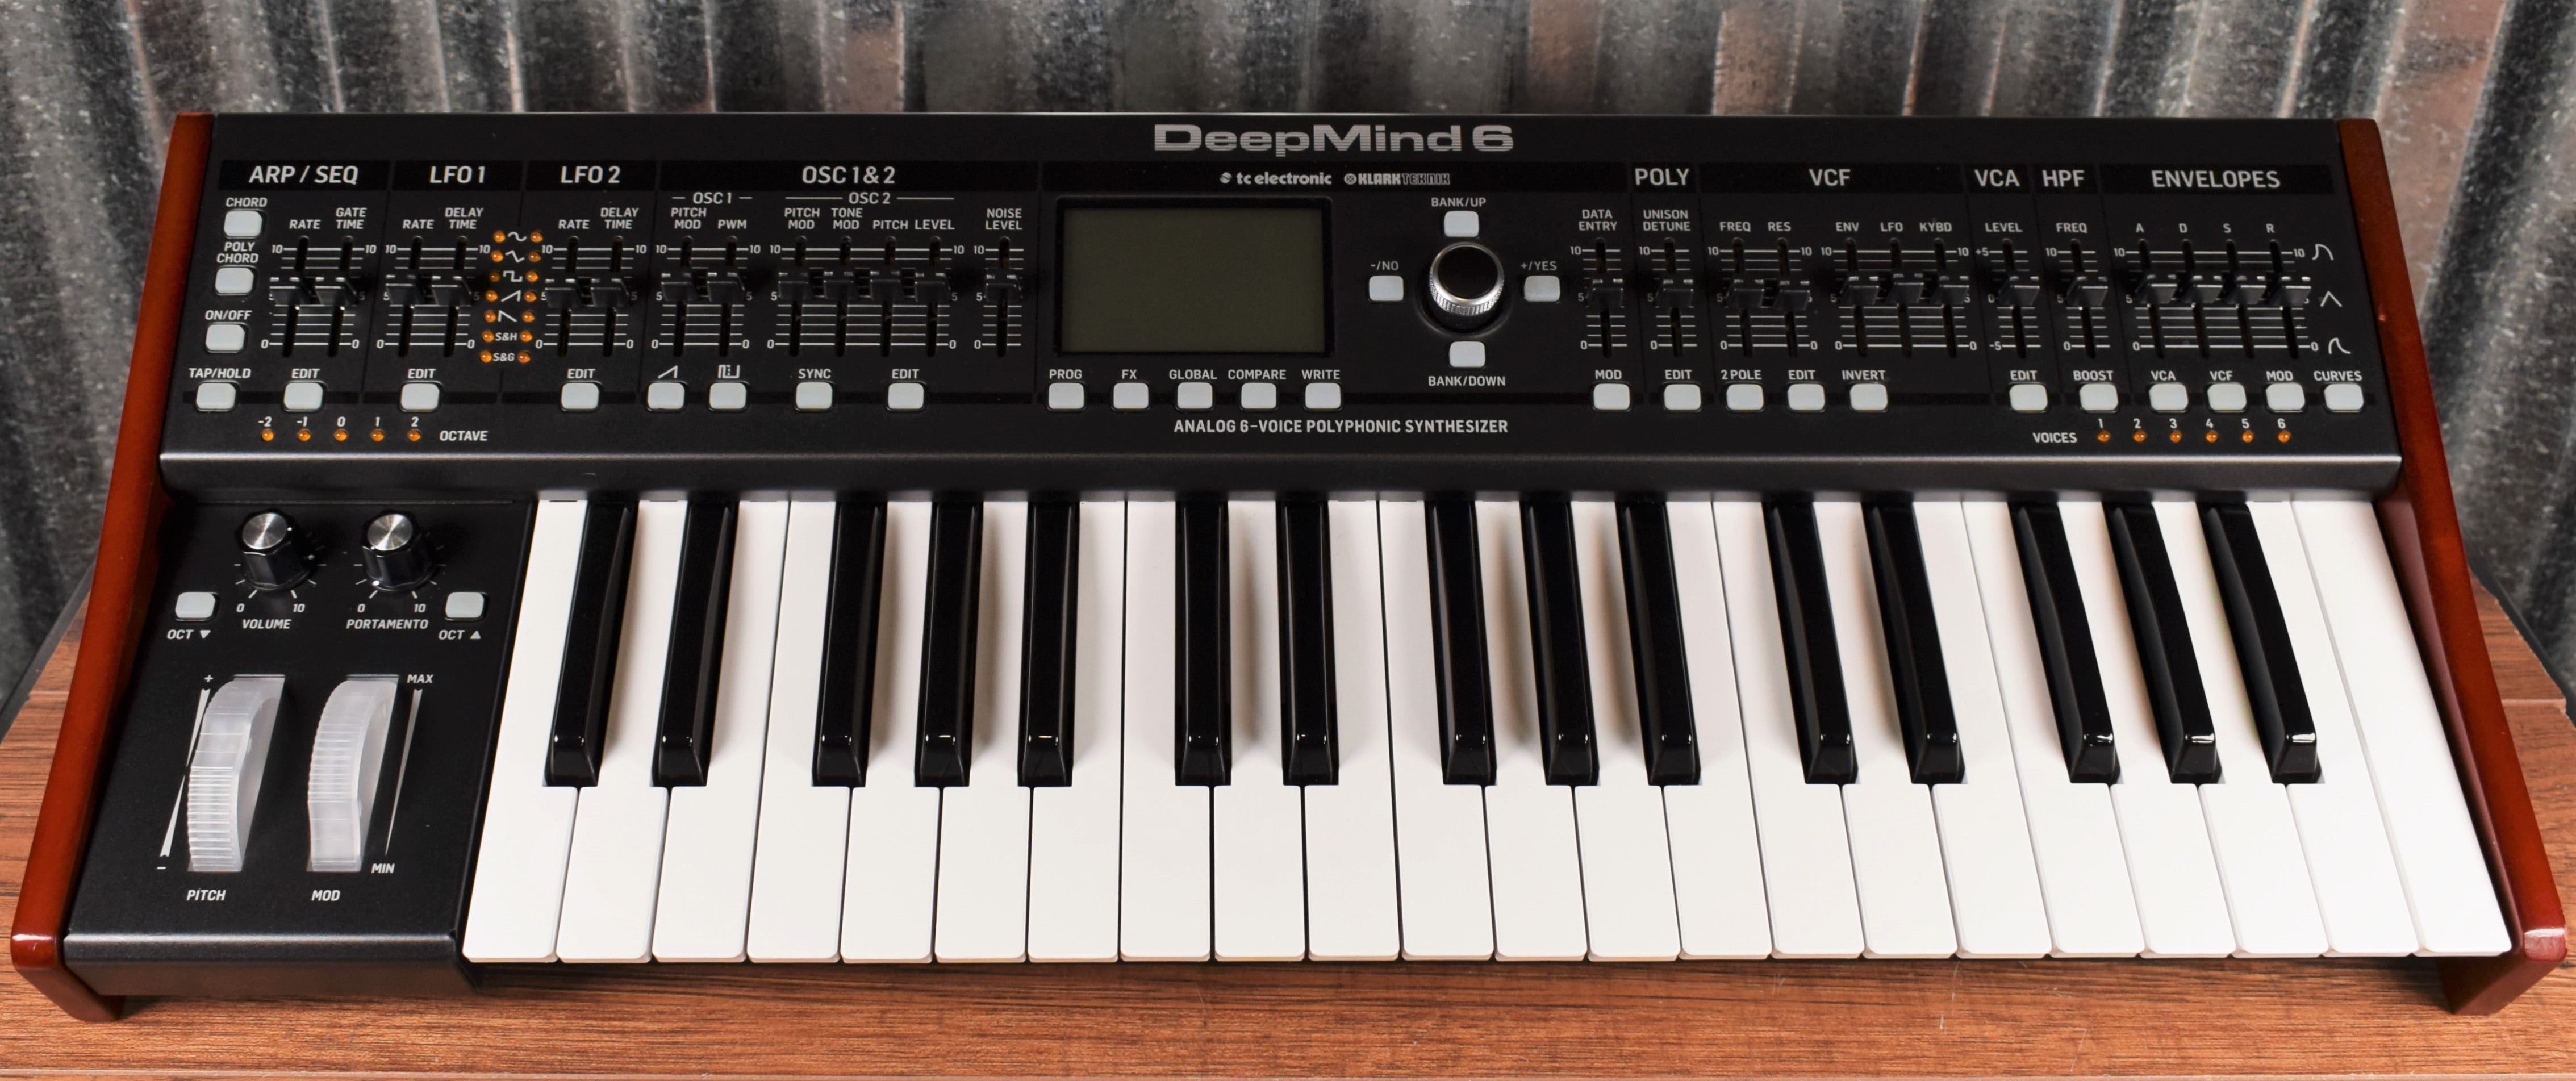 Behringer Deepmind 6 Voice Polyphonic Keyboard Synthesizer Used